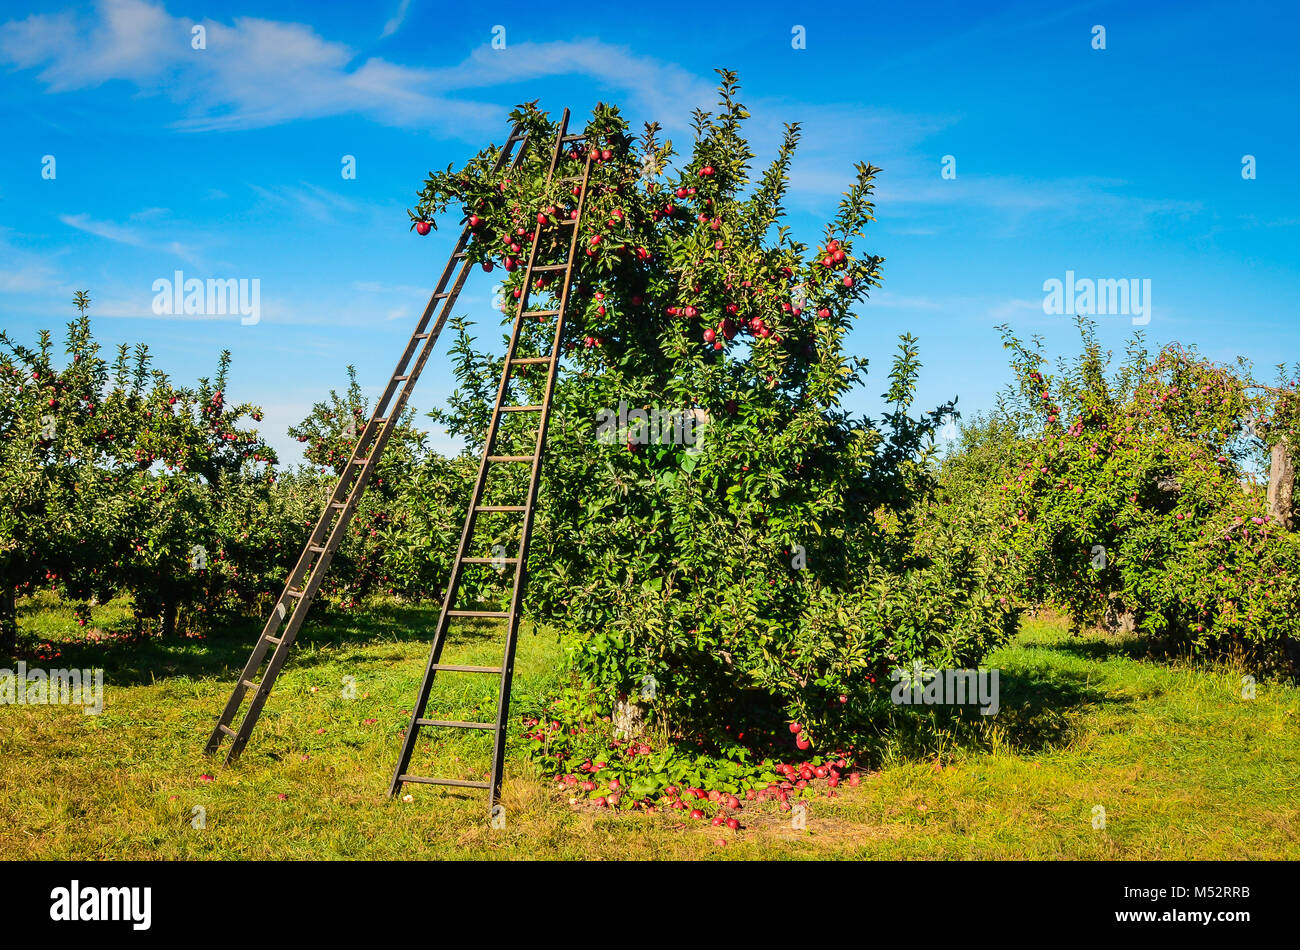 Ladders propped on Red Delicious Apple tree at Goolds Orchard, a pick your own apple farm in Upstate New York. Stock Photo